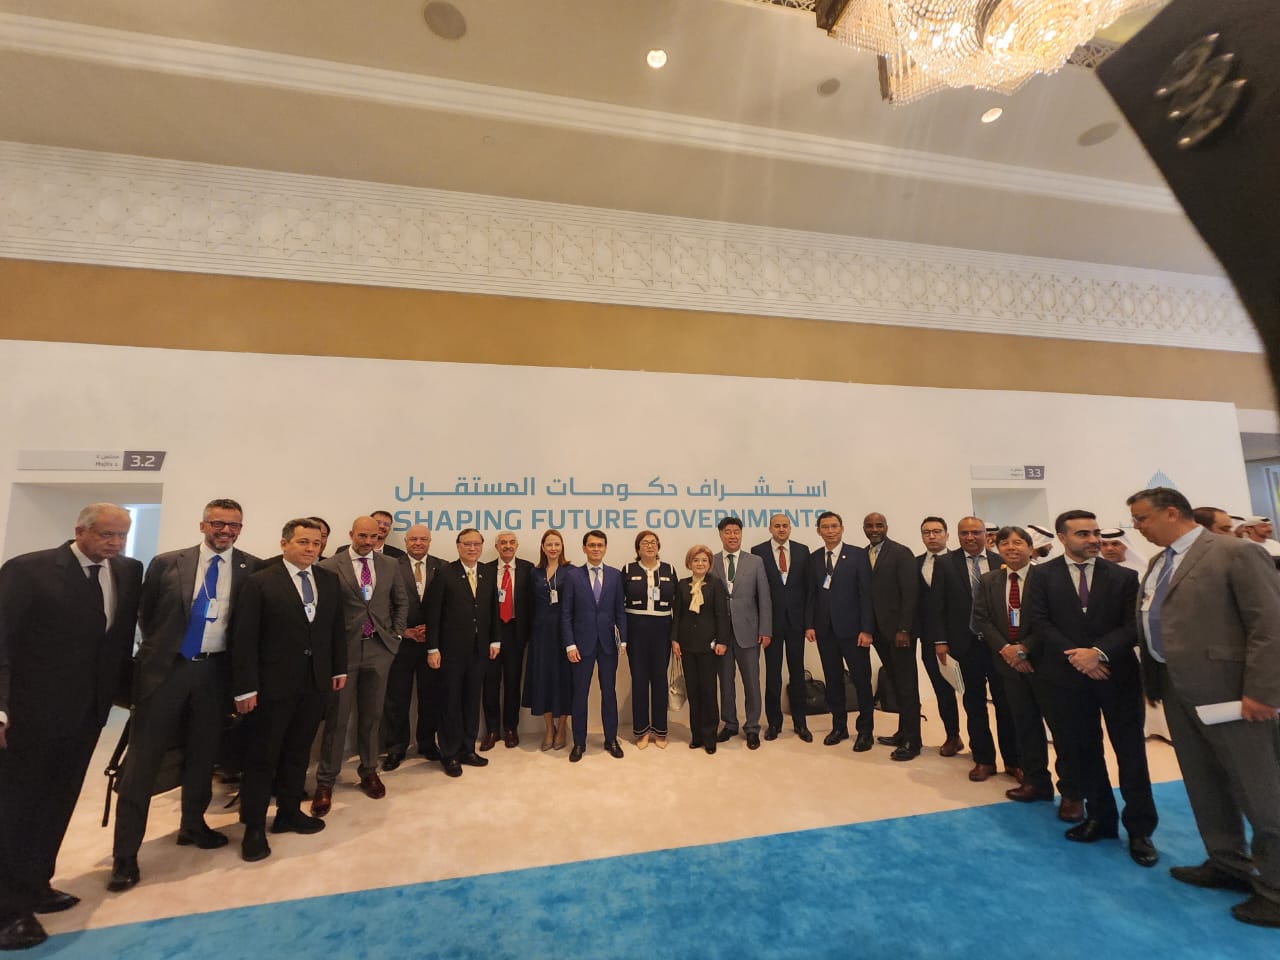 WGS 2024: Astana Civil Service Hub participated in a Ministerial roundtable on "Shaping Future Governments"